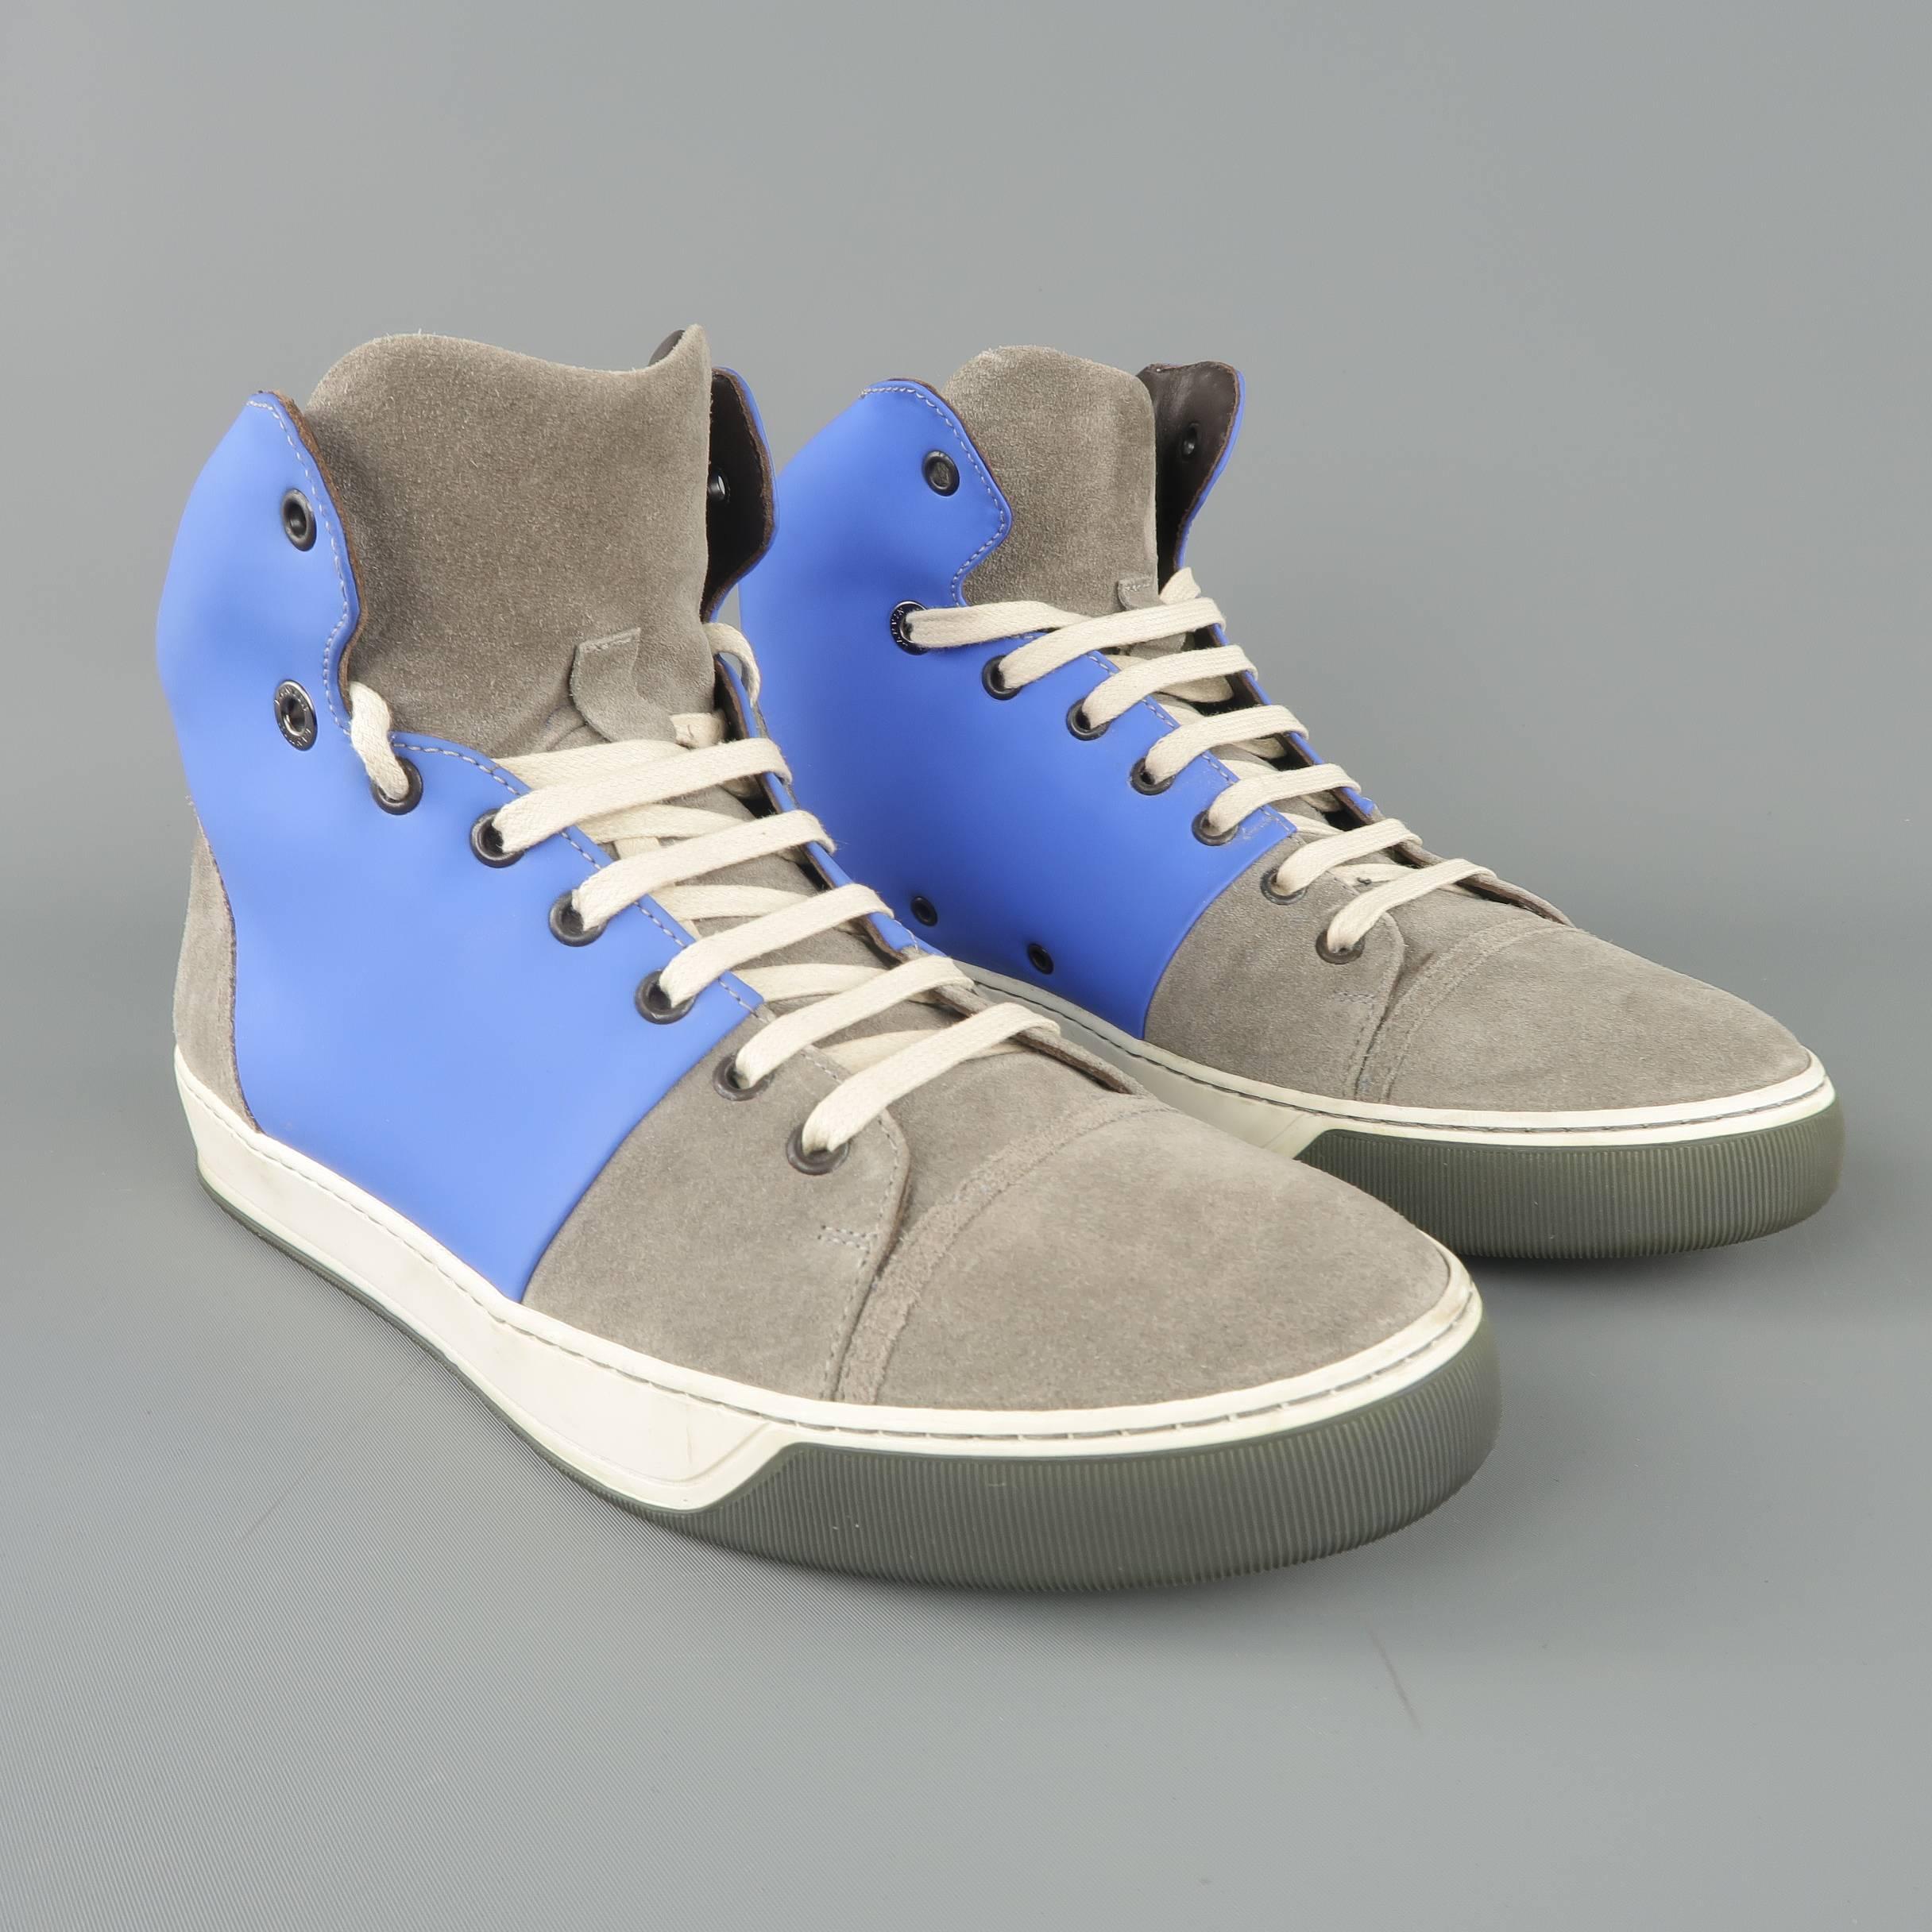 Men's LANVIN Size 8 Grey Suede & Blue Rubber Two Toned High Top Sneakers 1